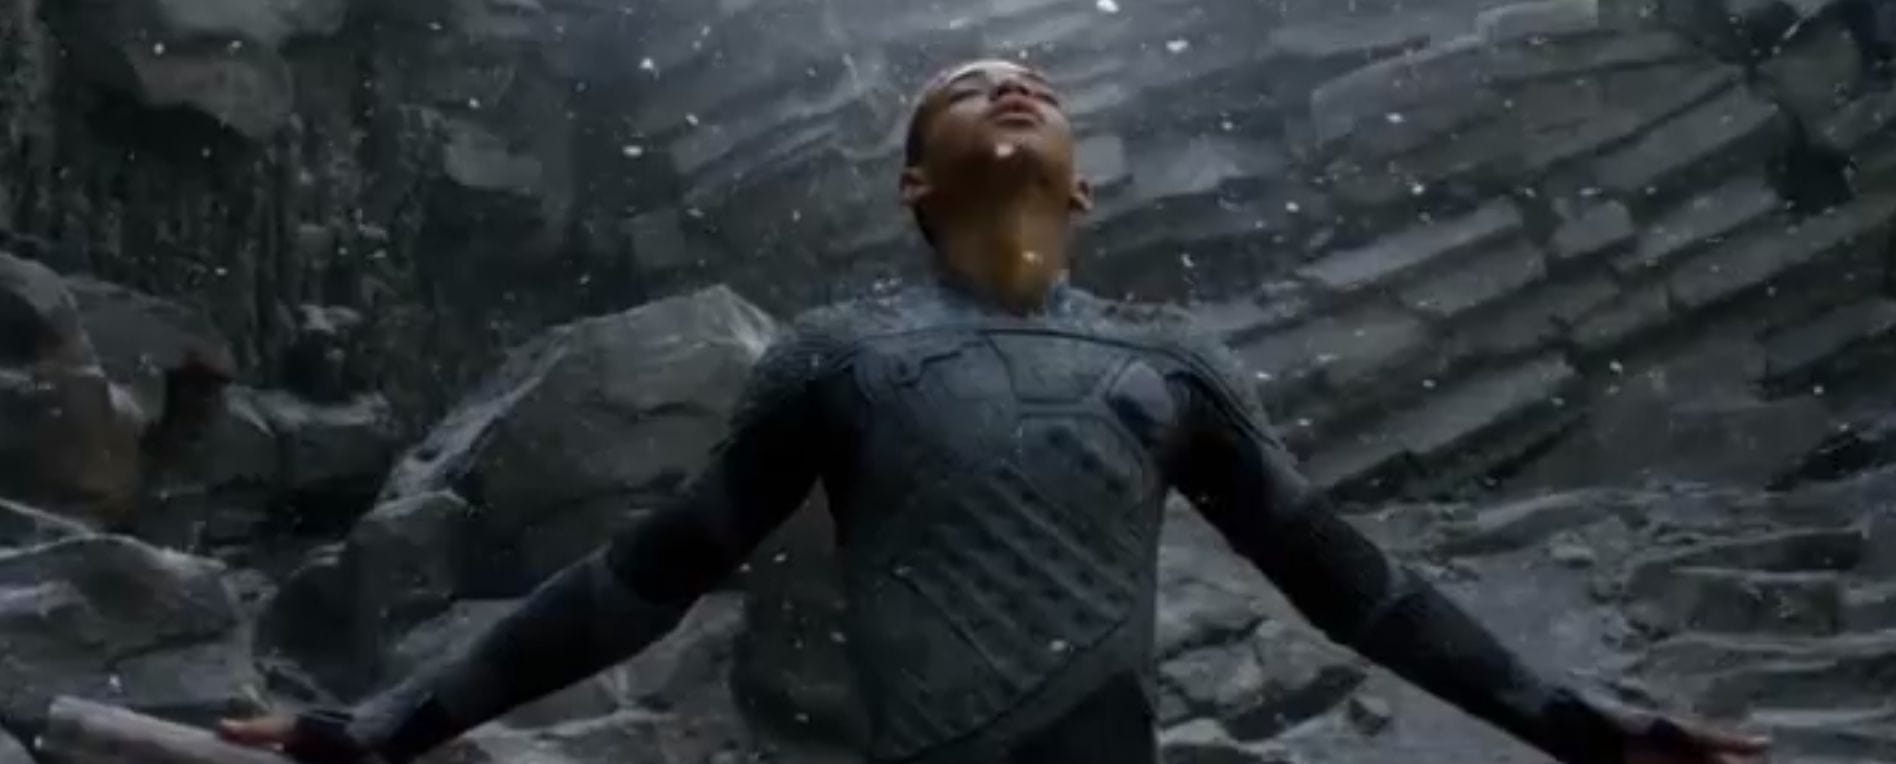 trailer for after earth movie